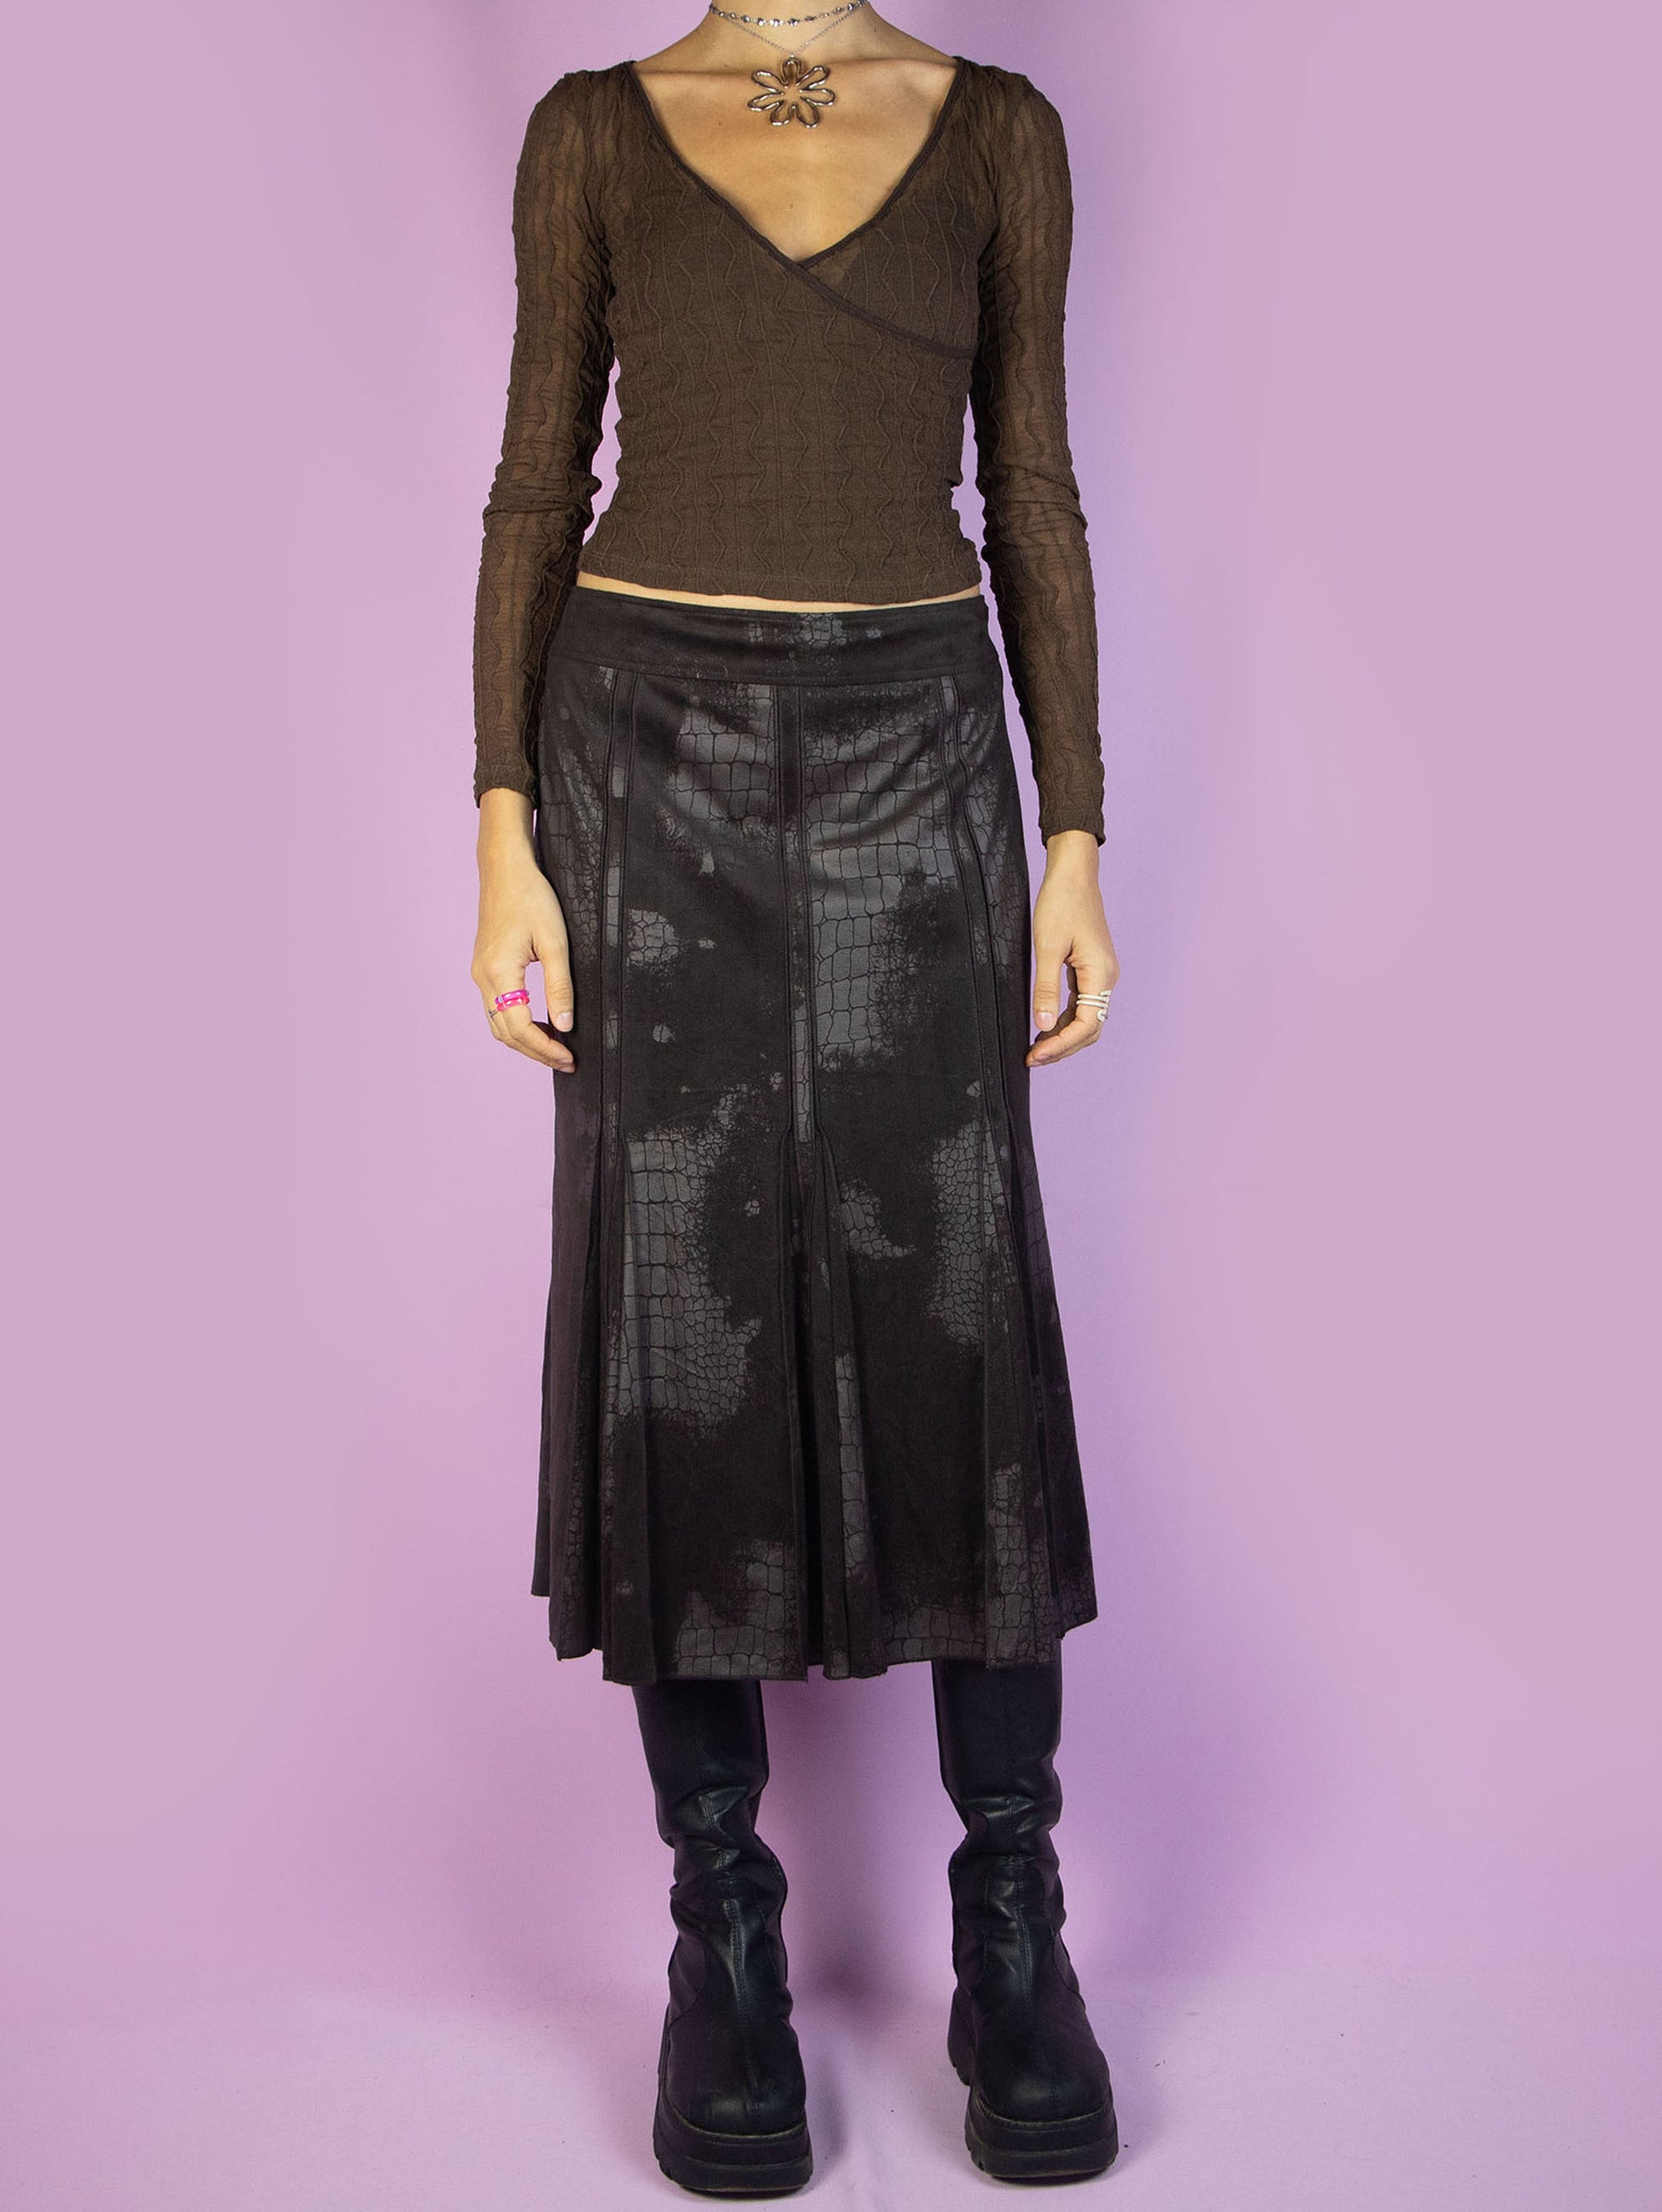 The Y2K Dark Brown Midi Skirt is a vintage flared faux suede skirt with animal pattern details and a side zipper closure. Gorgeous fairy grunge whimsygoth style 2000s boho skirt. 